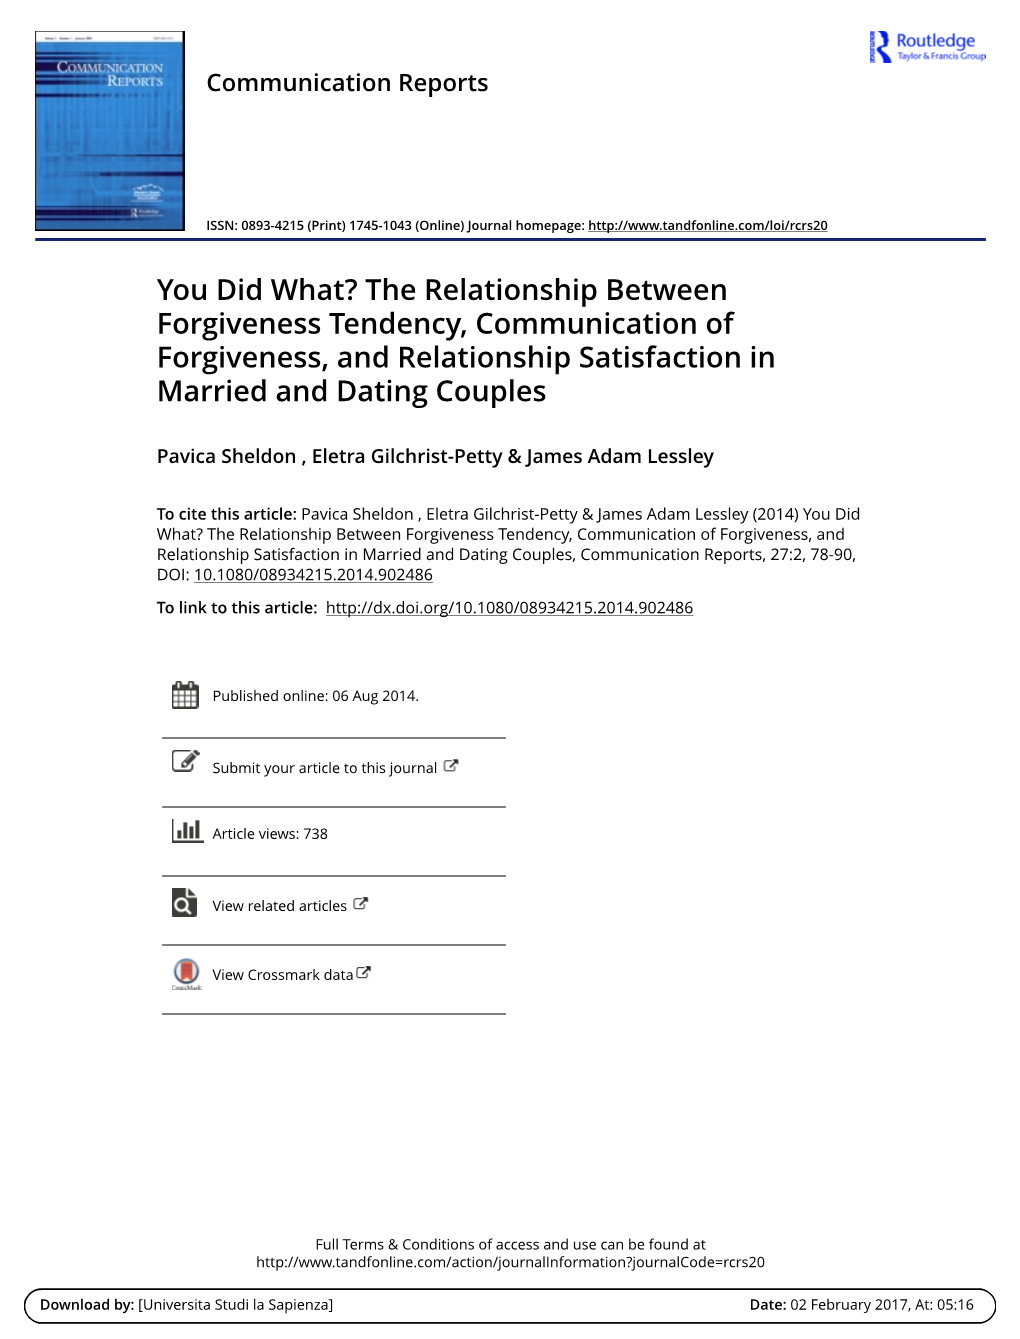 You Did What? the Relationship Between Forgiveness Tendency, Communication of Forgiveness, and Relationship Satisfaction in Married and Dating Couples